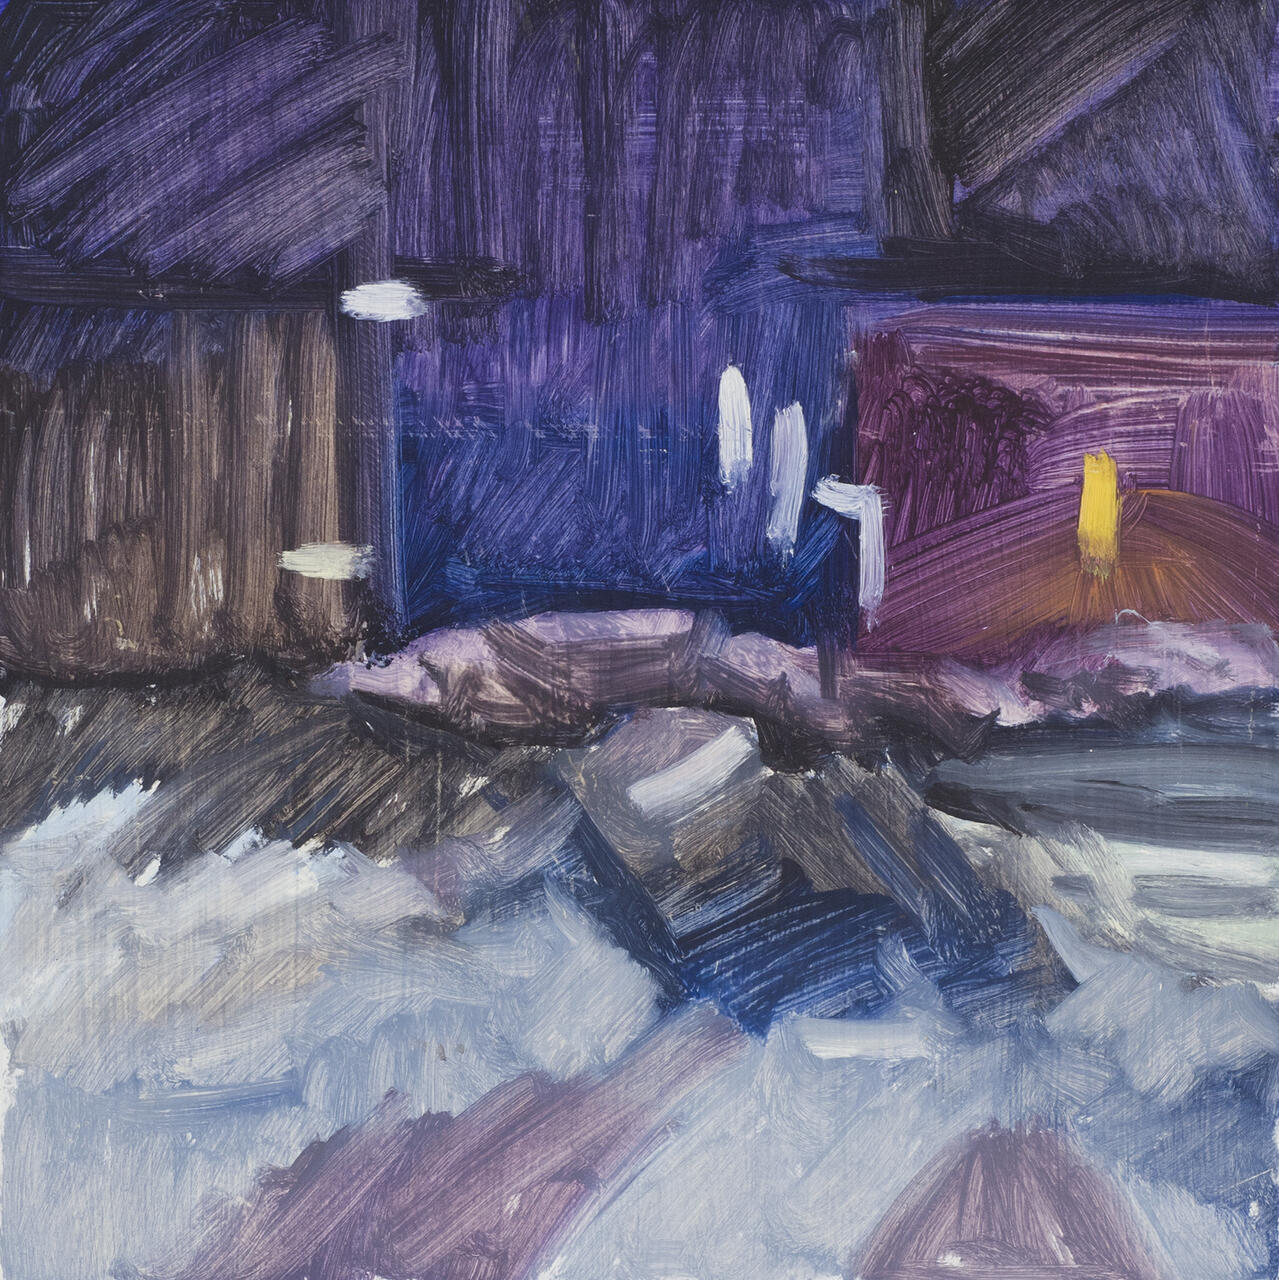 Textural painting of buildings in the evening, set against a purple and blue sky.